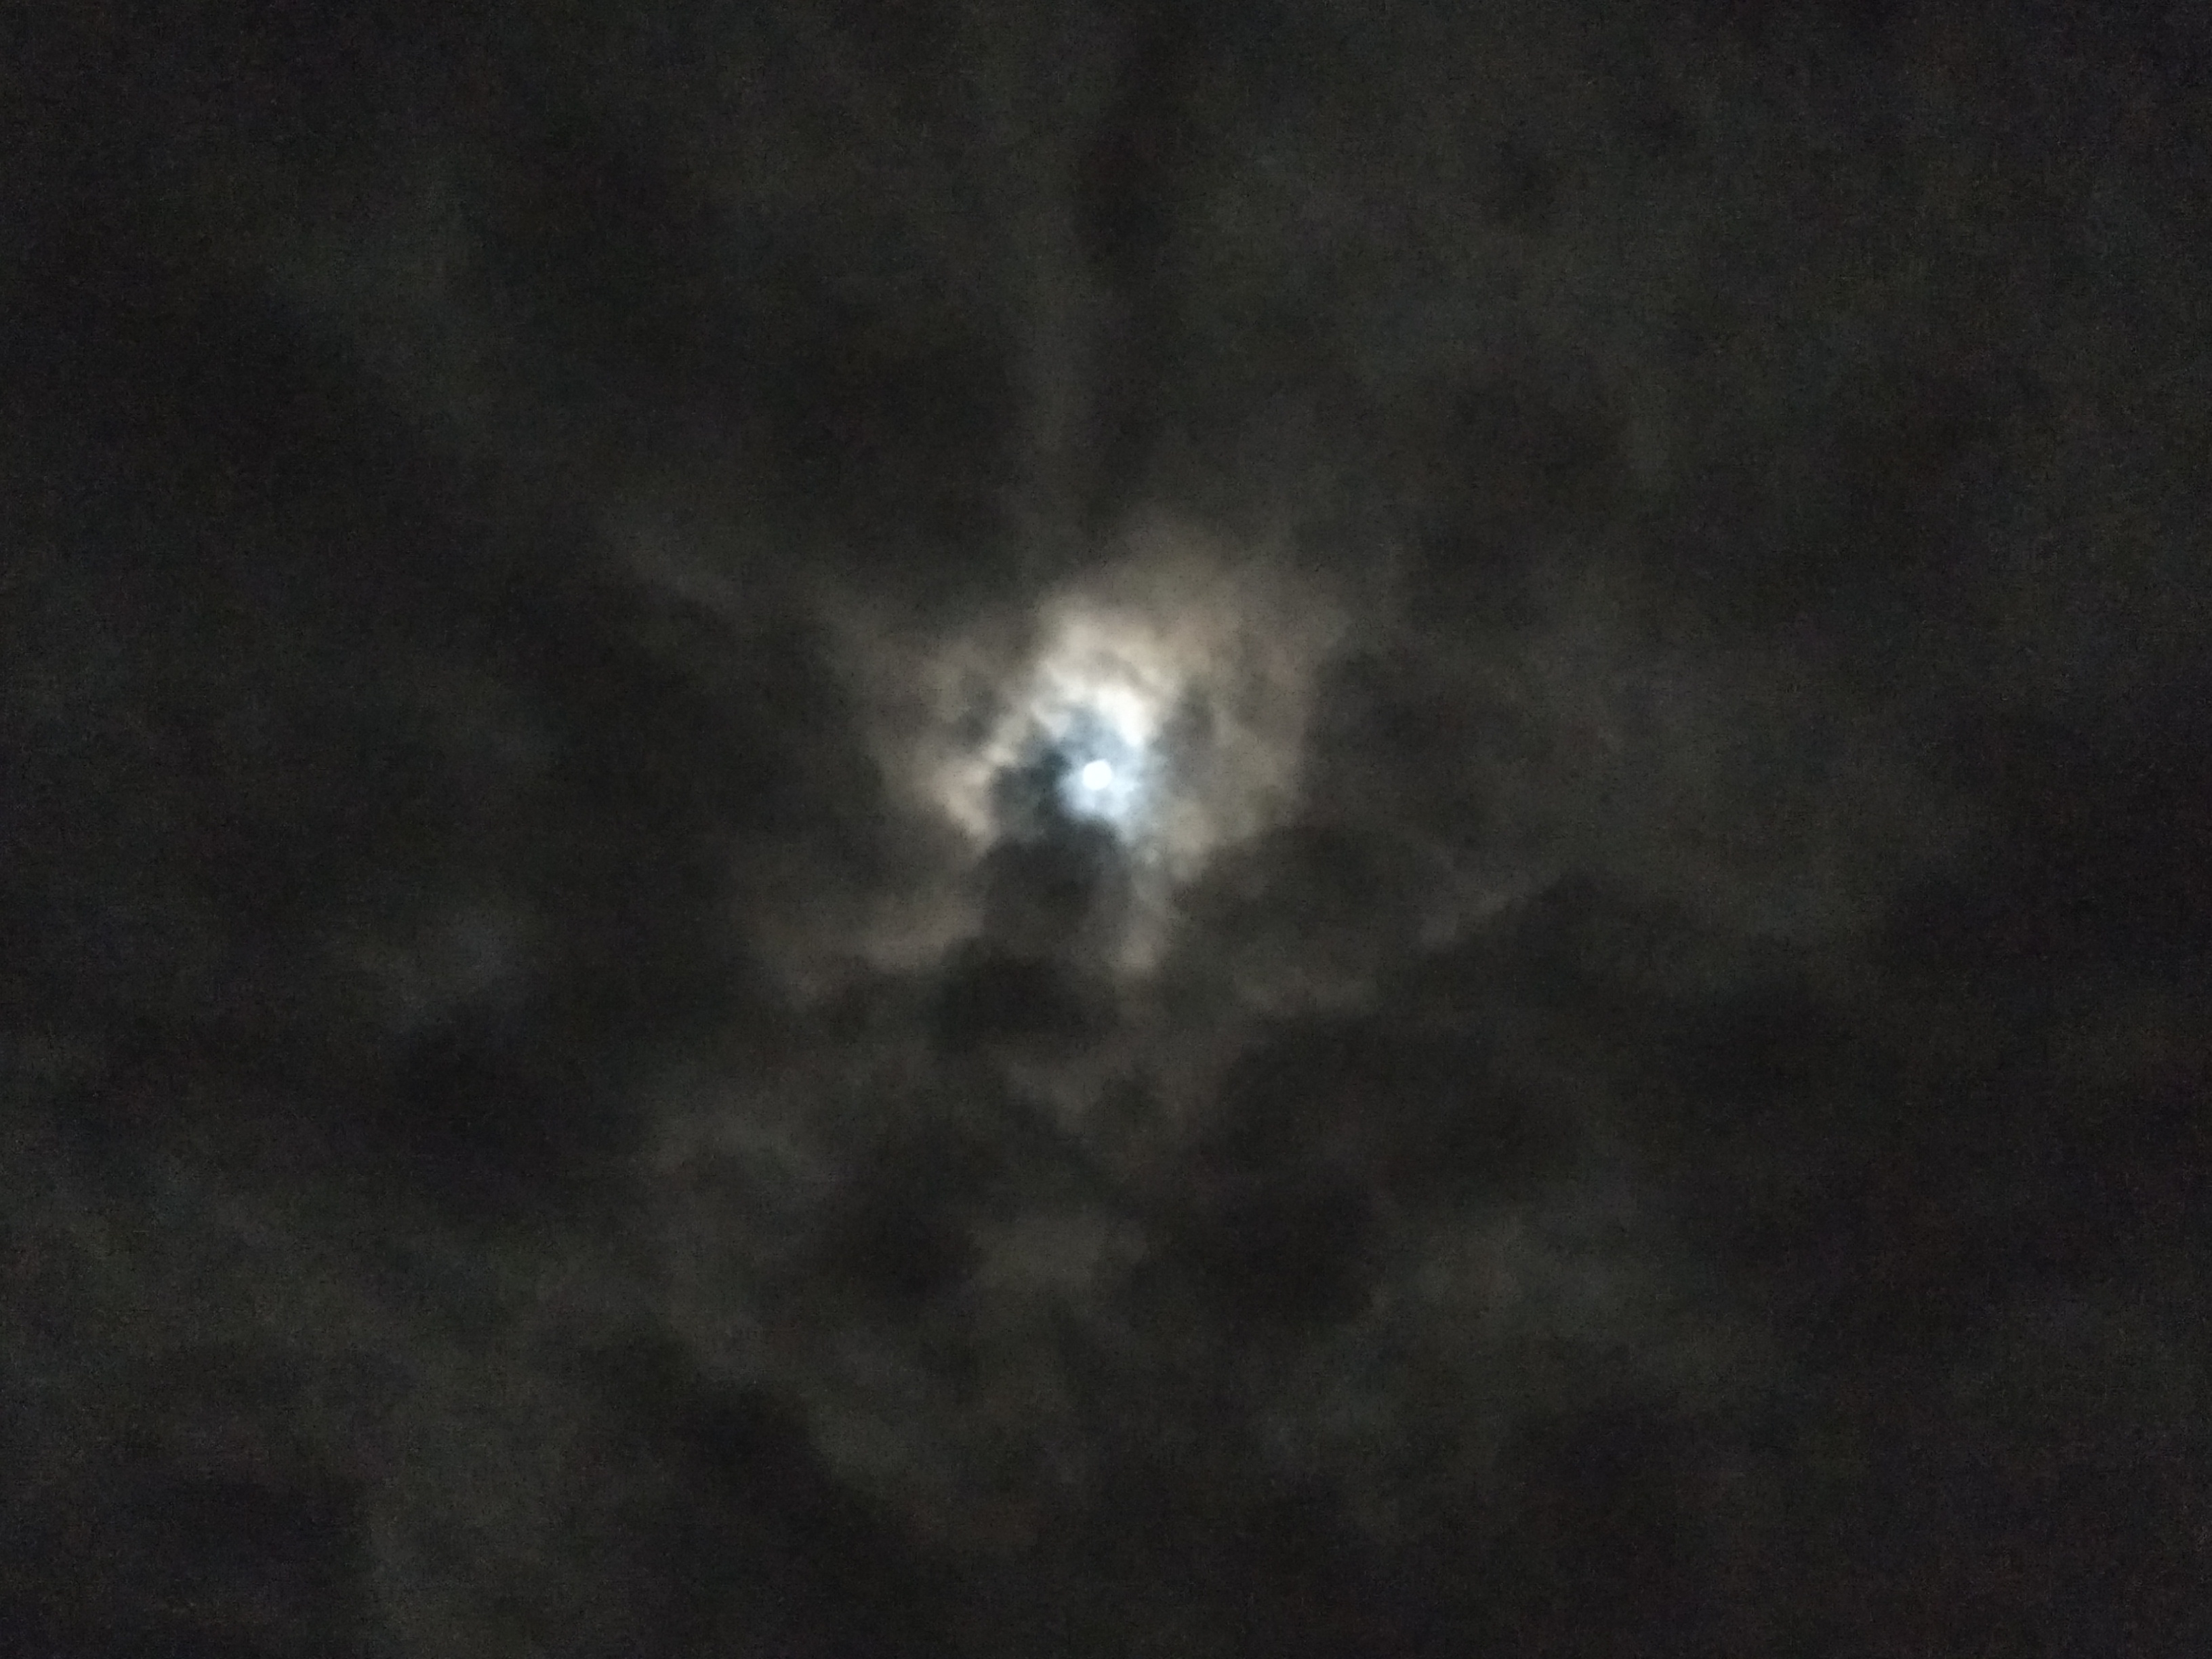 A full moon in a cloudy gray sky